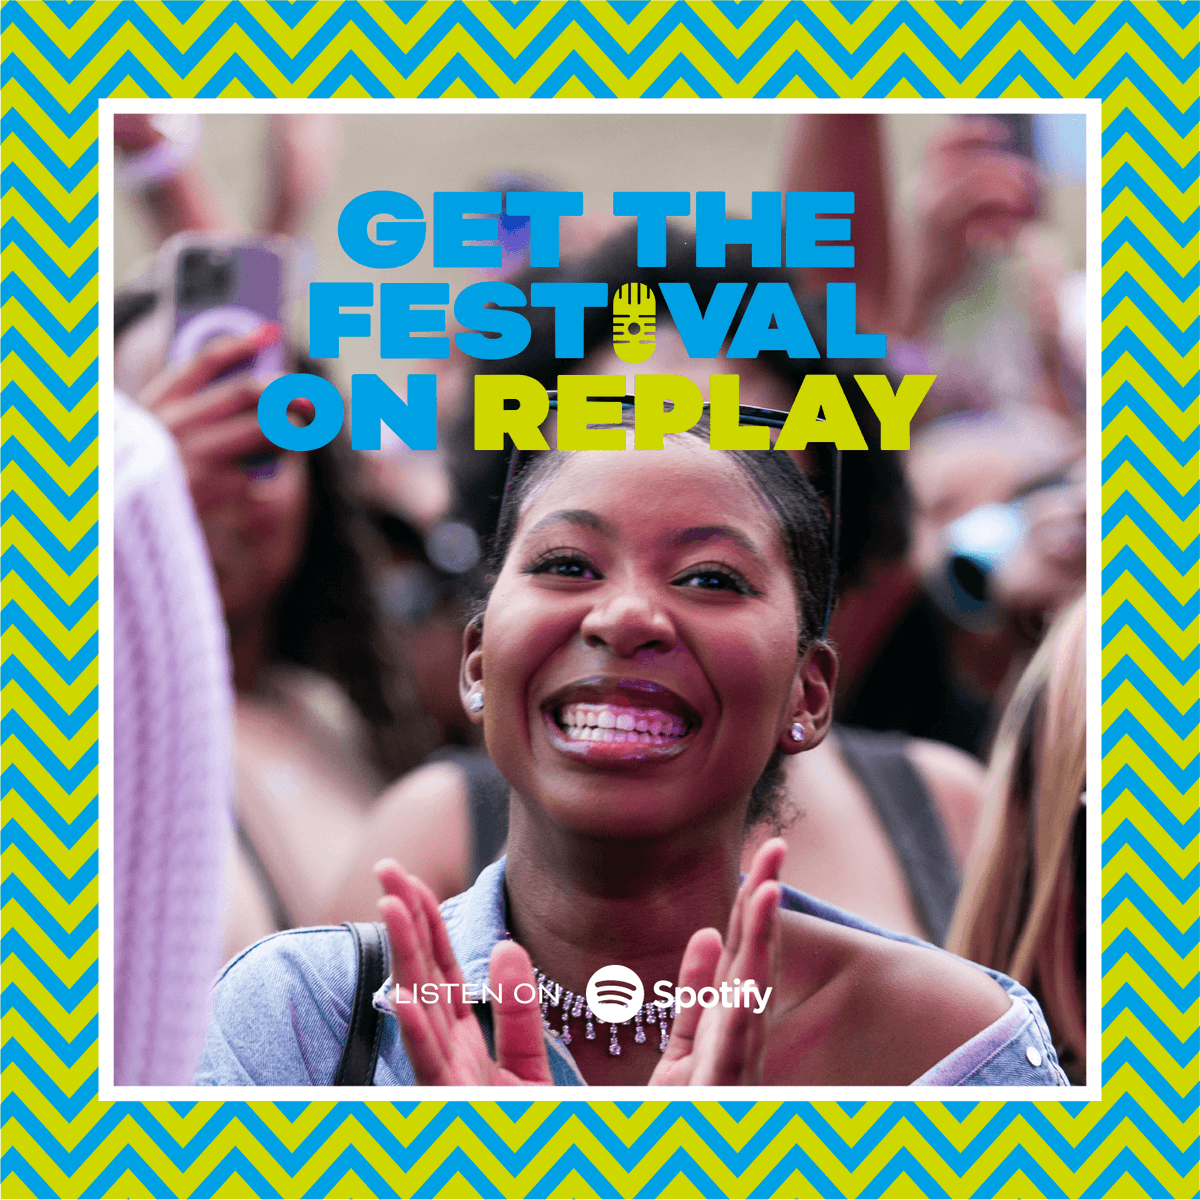 Get ready to groove into the weekend with our exclusive #DStvDeliciousFestival playlist on Spotify > rb.gy/kbo8w Amapiano to jazz & Afro-house, igniting your weekend. Celebrating diversity beyond the festival. #GPLifestyle #VisitGauteng #Welcome2joburg